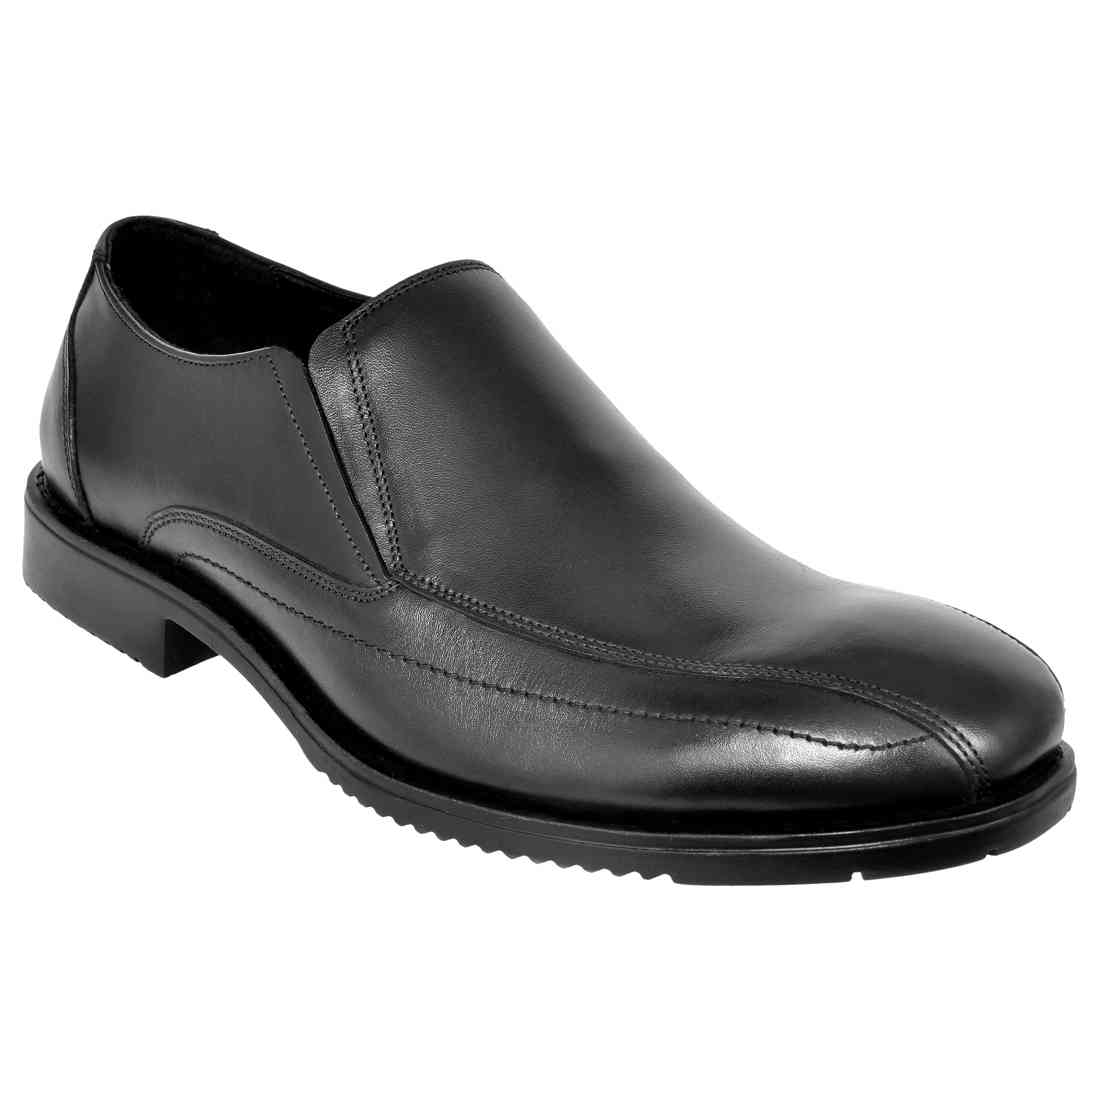 OHM New York Classic Leather Slip-on Shoes